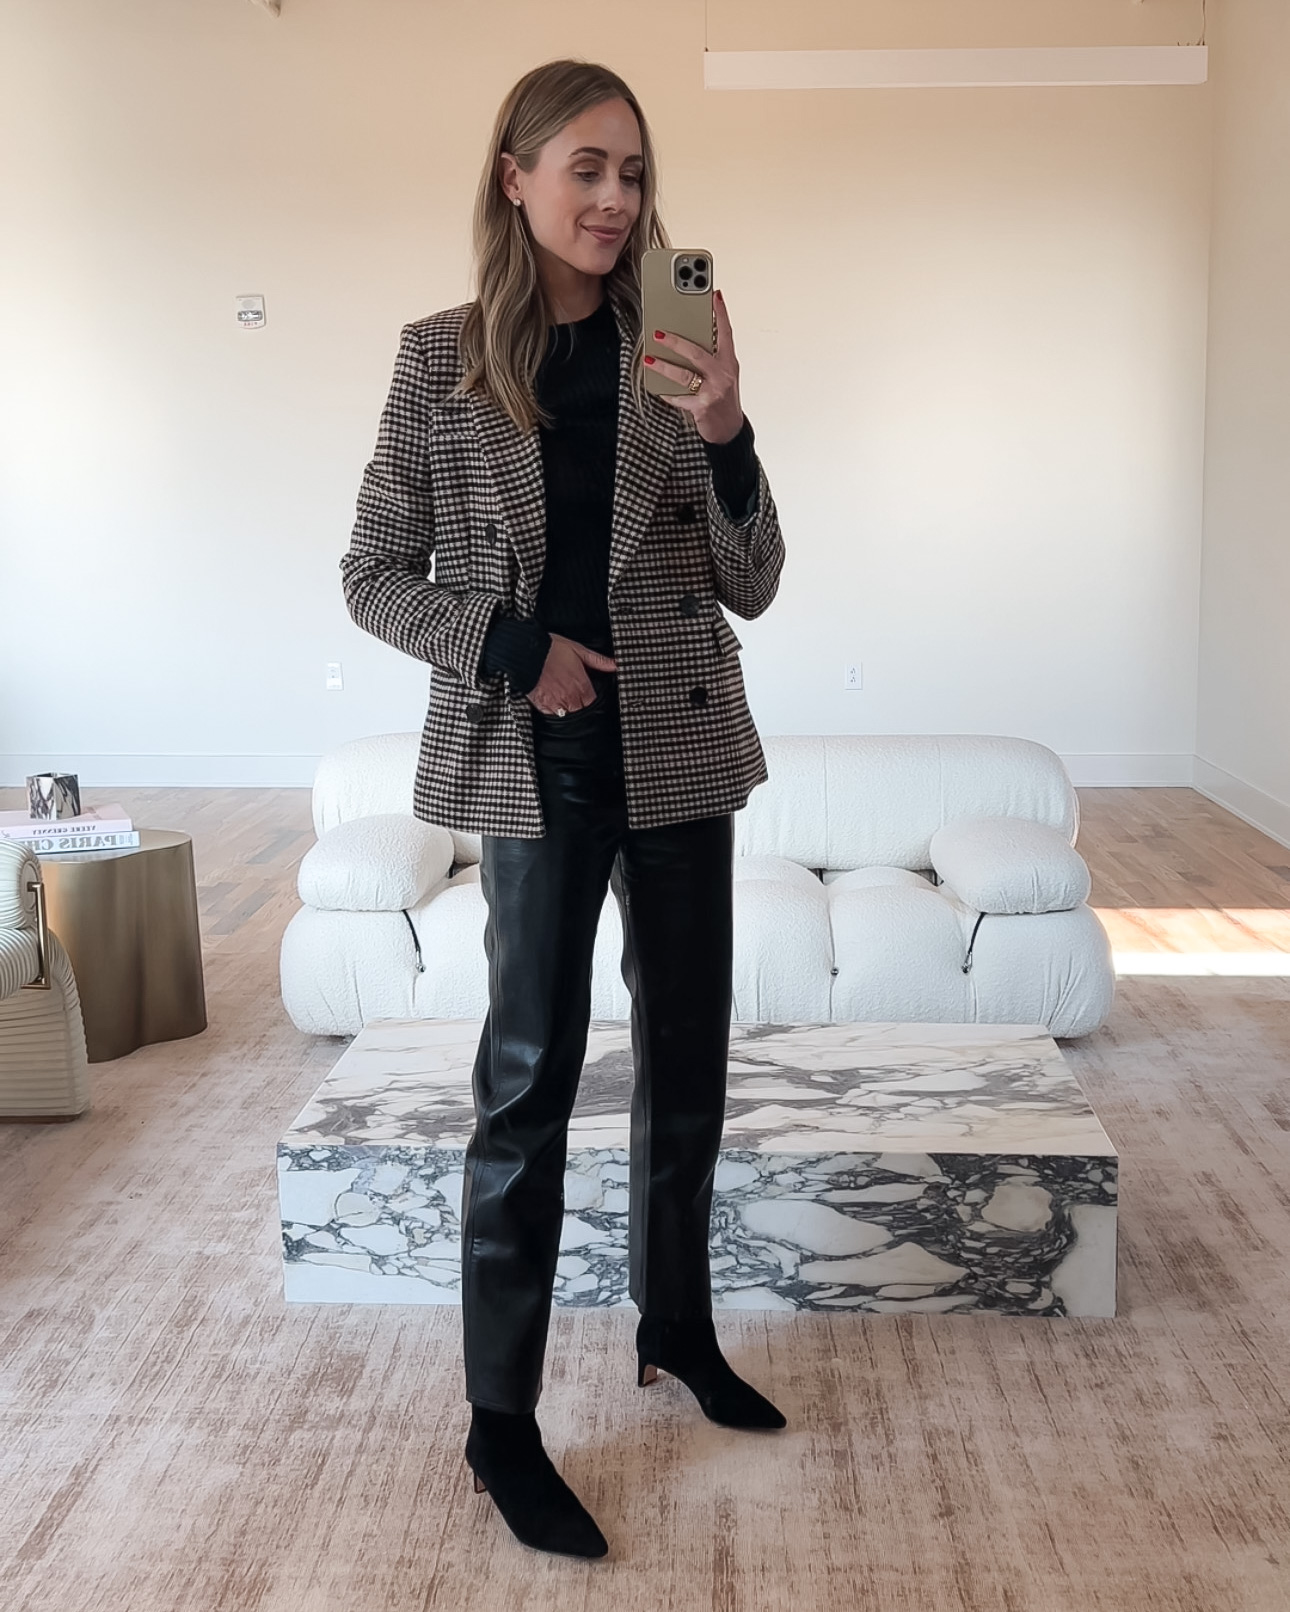 Fashion Jackson Wearing Scotch & Soda Heritage Checked Double Breasted Blazer AGOLDE 90s Recycled Leather Fitted Pants Black Booties Fall Outfit Fall Workwear Outfit